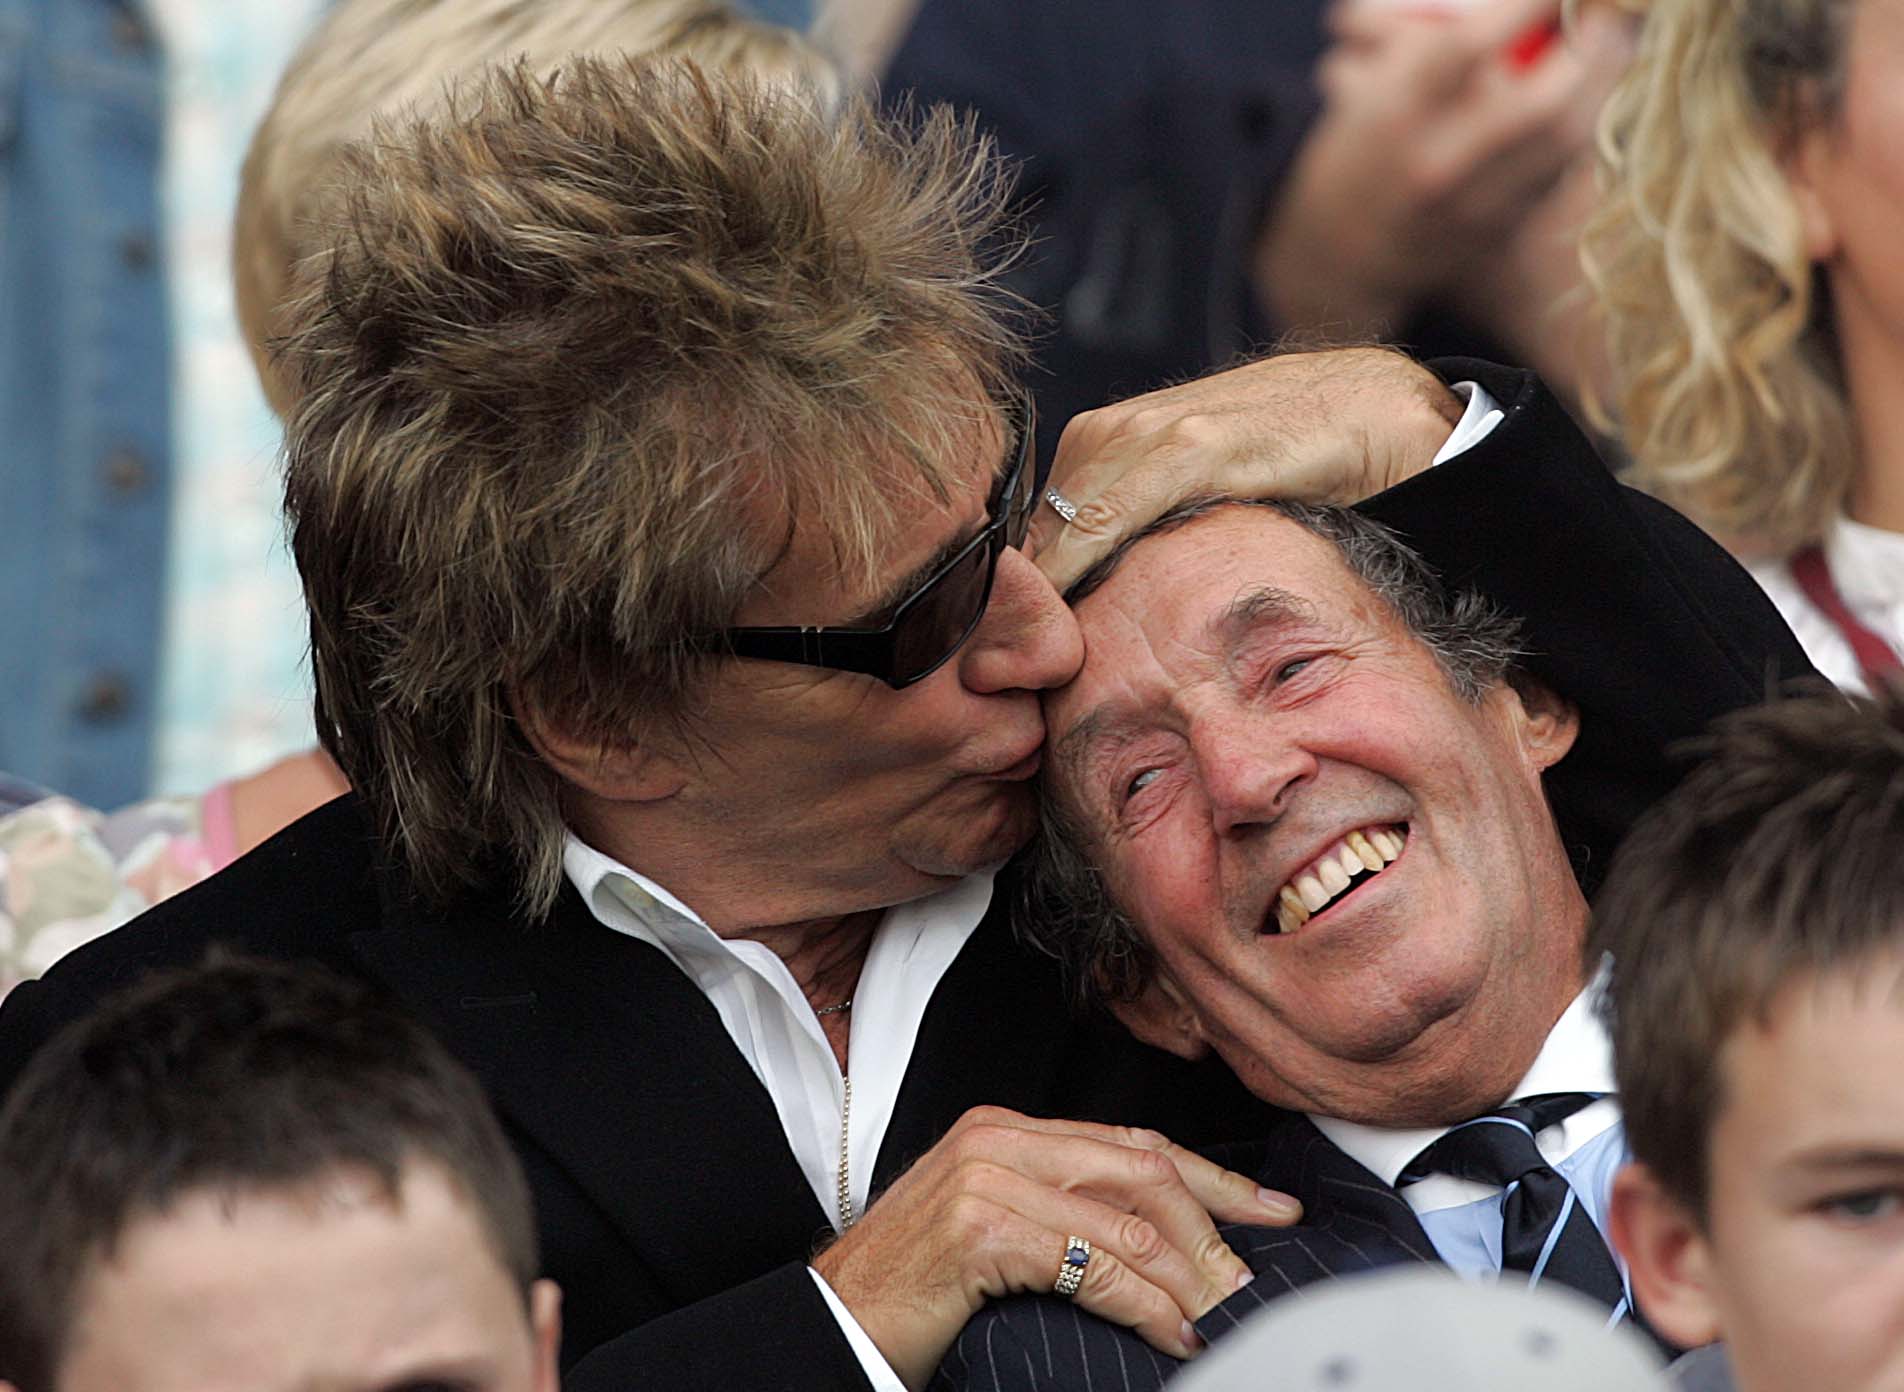 Rod Stewart and his brother during the Euro Group B qualifying match at Hampden Park on October 13, 2007, in Glasgow, Scotland | Source: Getty Images